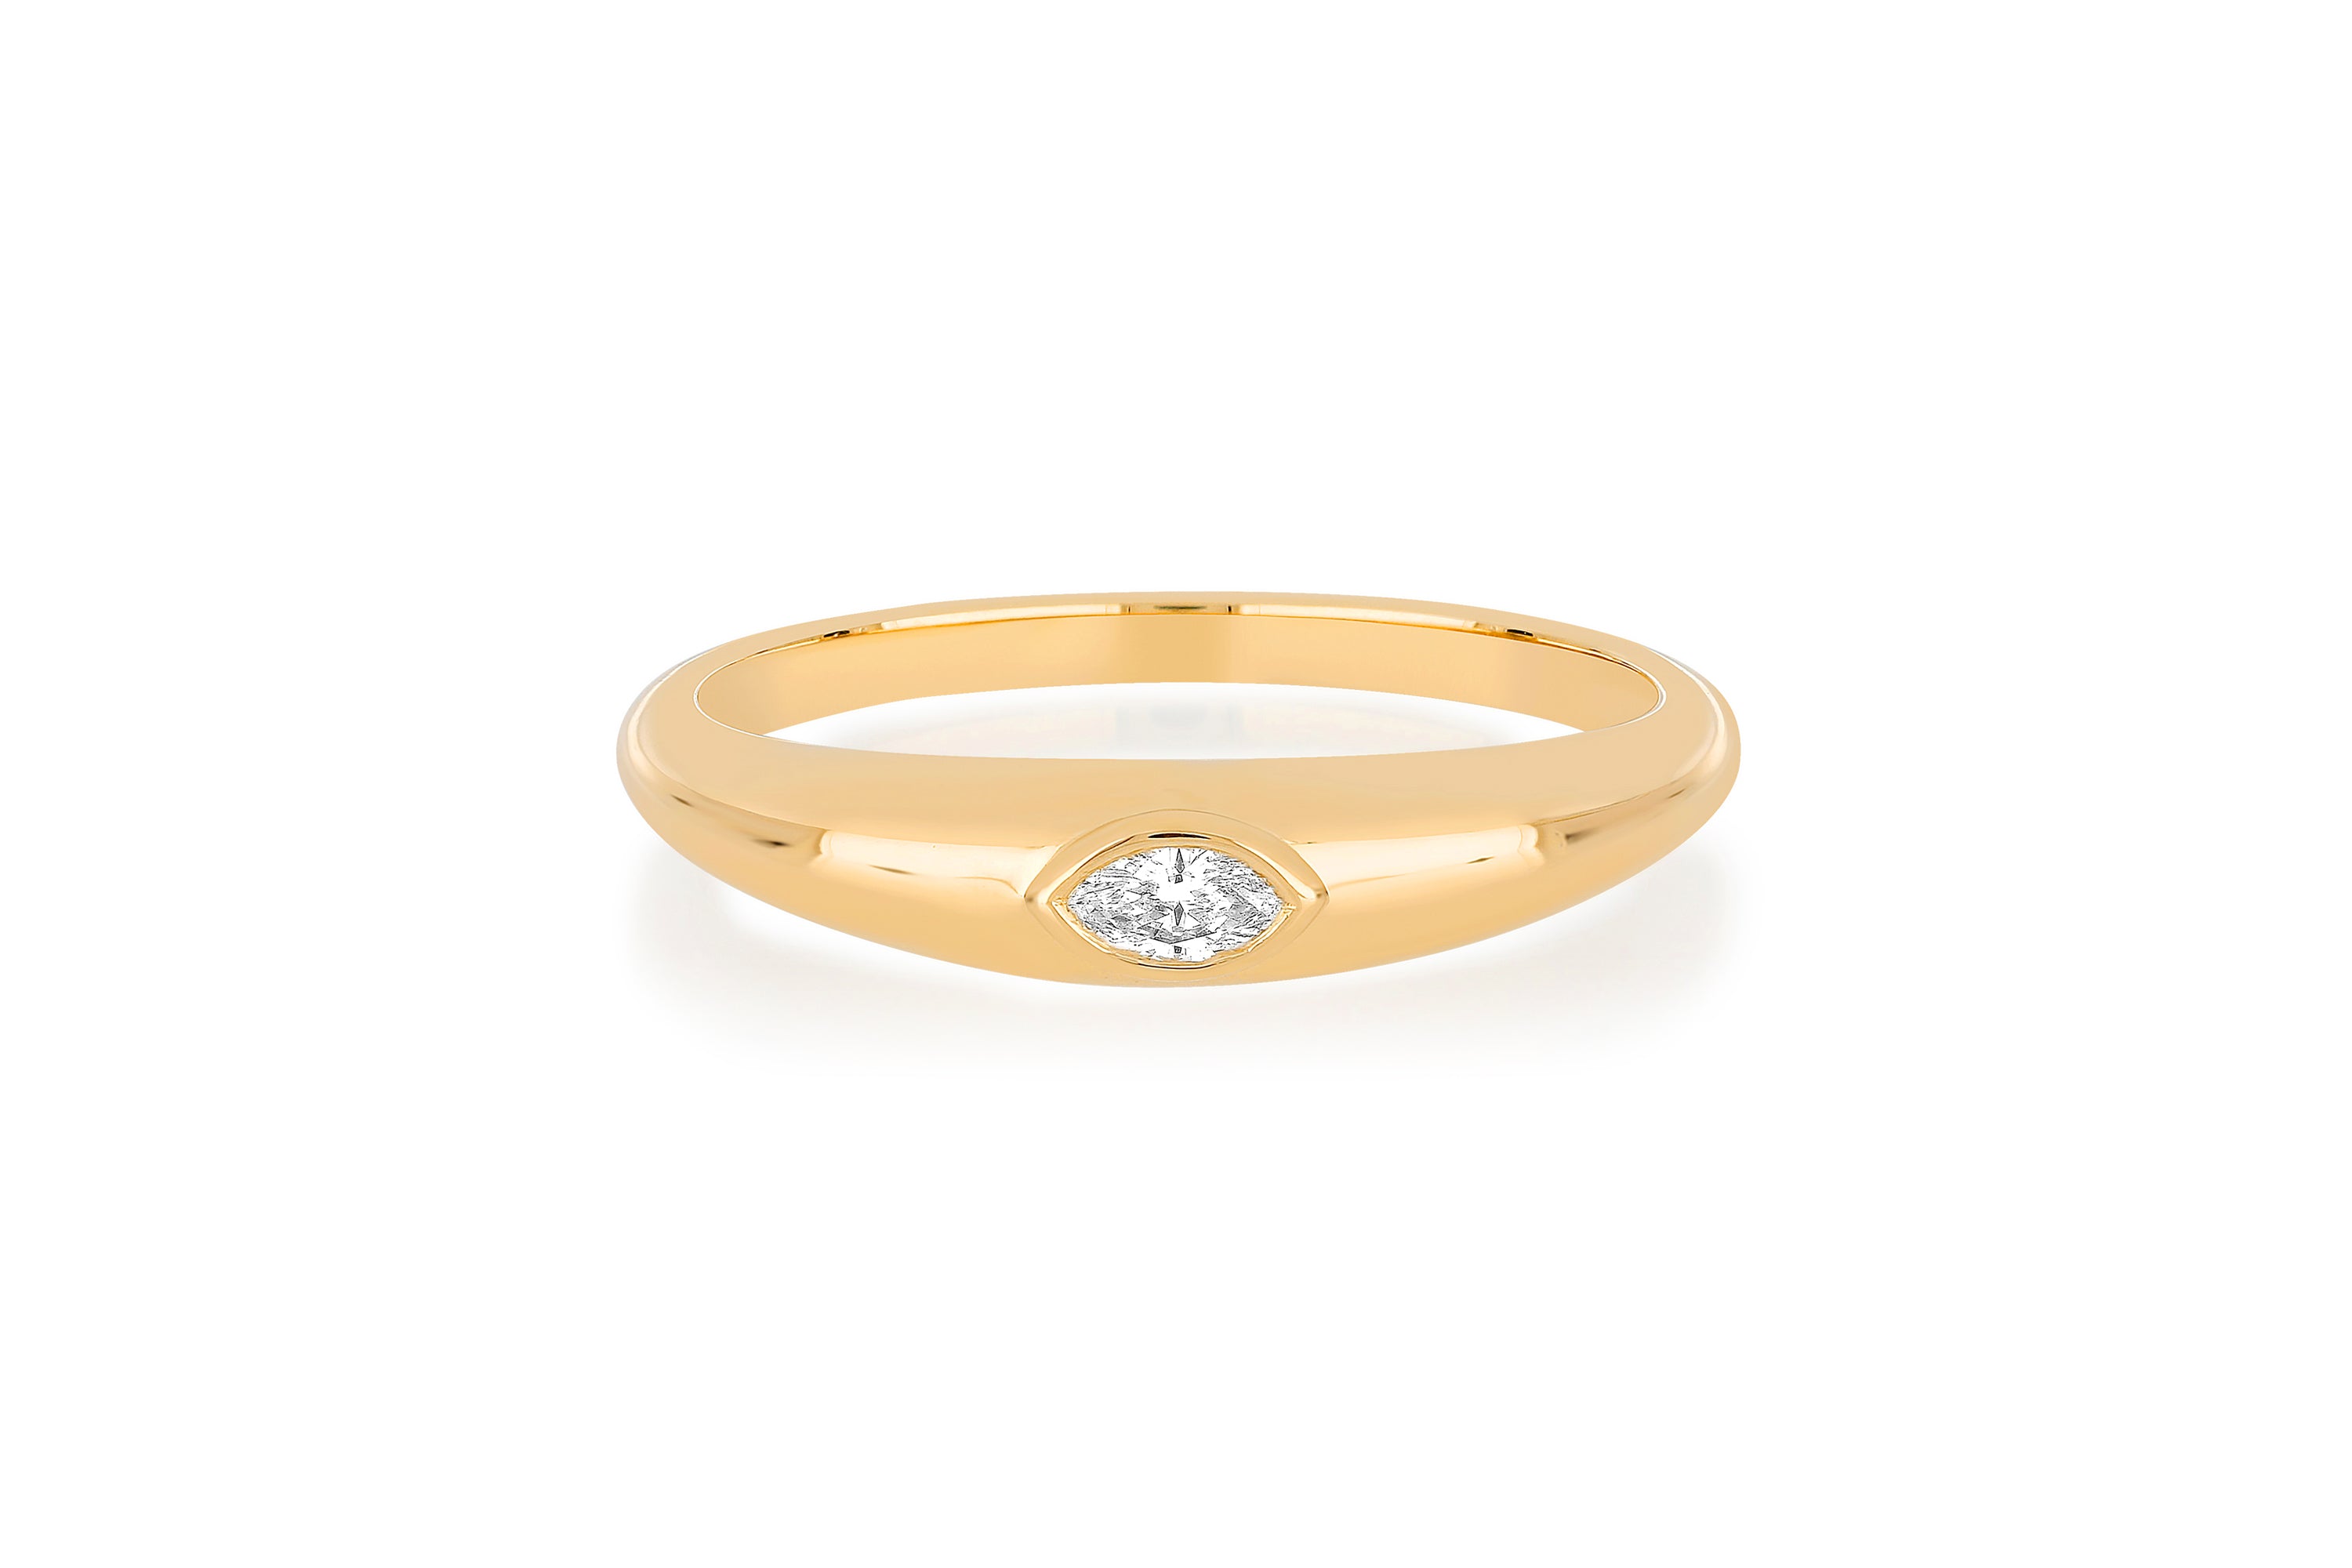 Gold Dome Ring With Diamond Marquise Center in 14k yellow gold